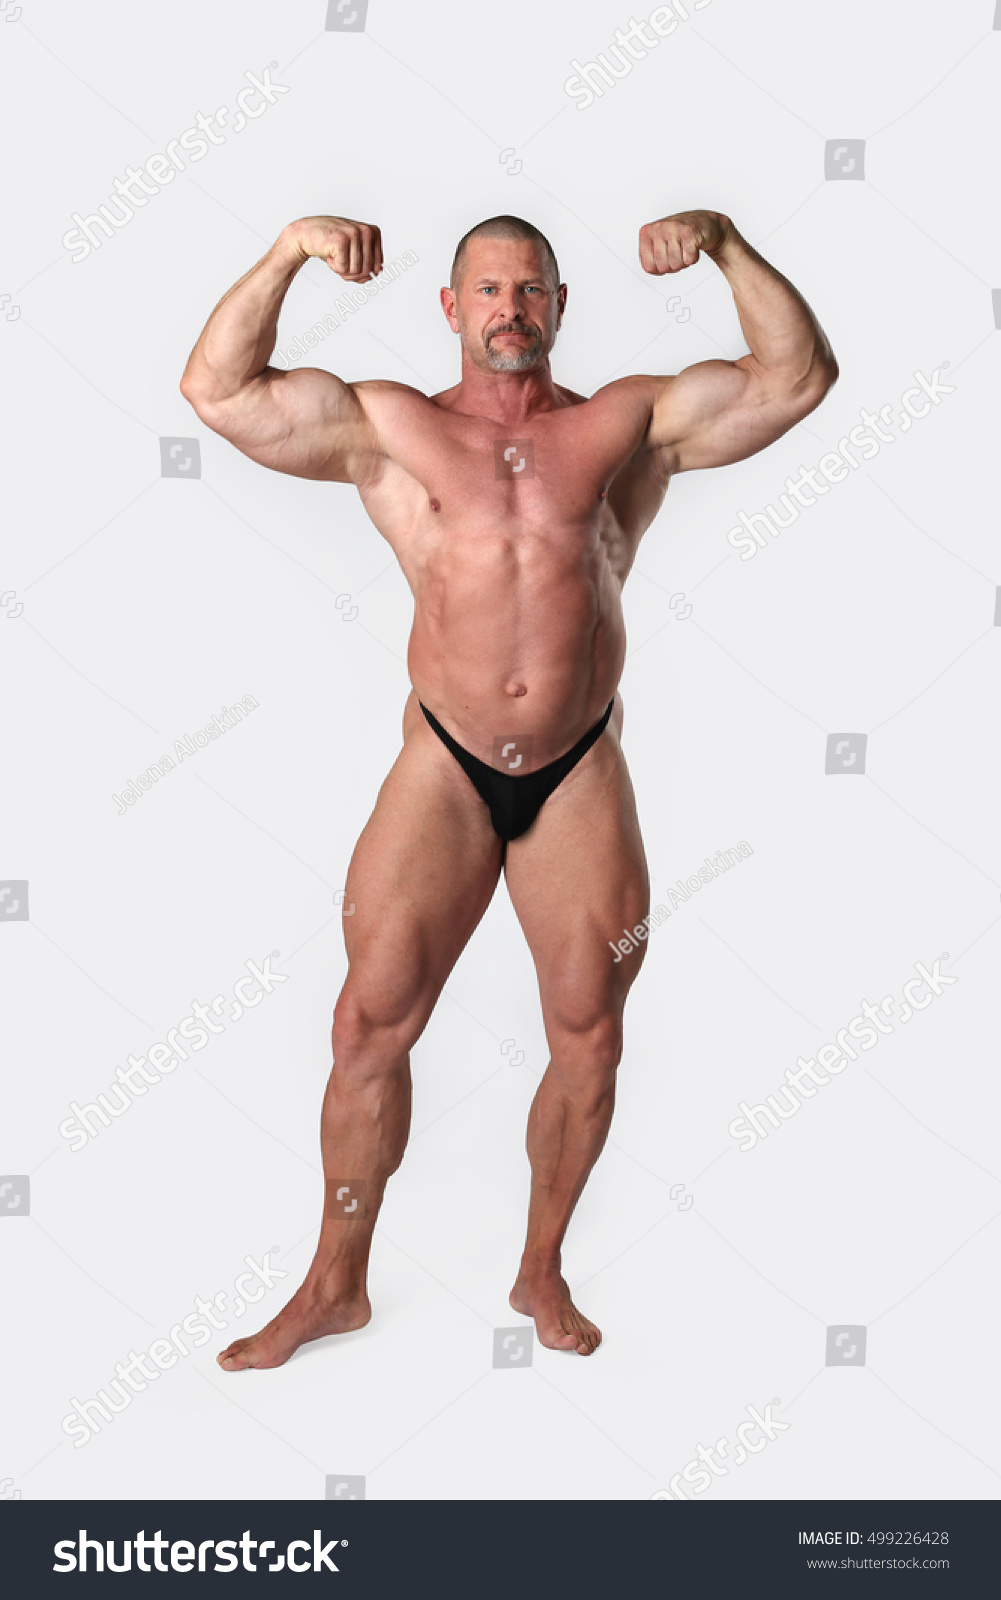 stock-photo-athletic-strong-man-poses-and-showing-strained-muscles-of-his-naked-body-on-gray-background-499226428.jpg